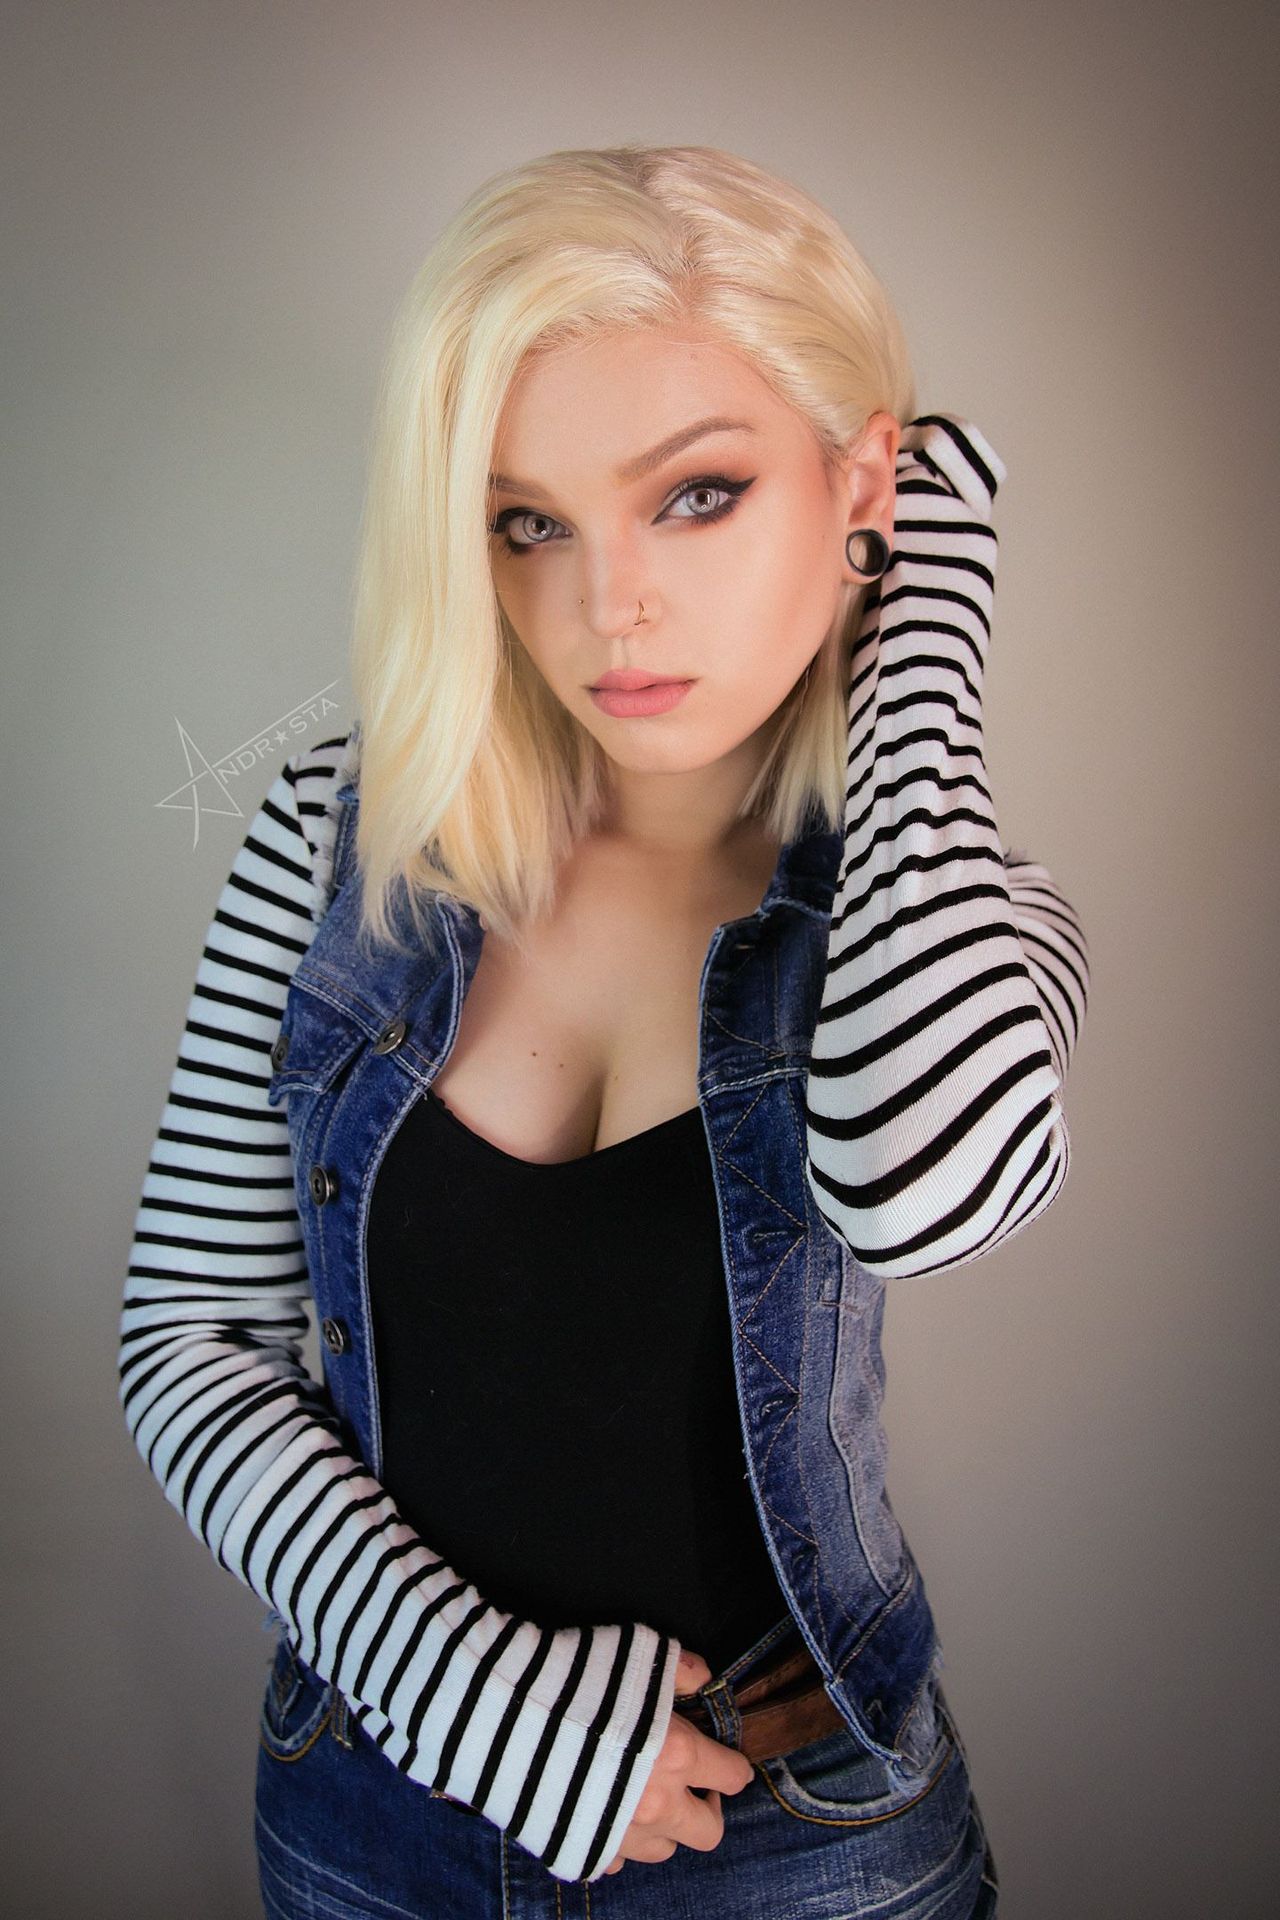 Best Lewd Android 18 Cosplay - Andrasta